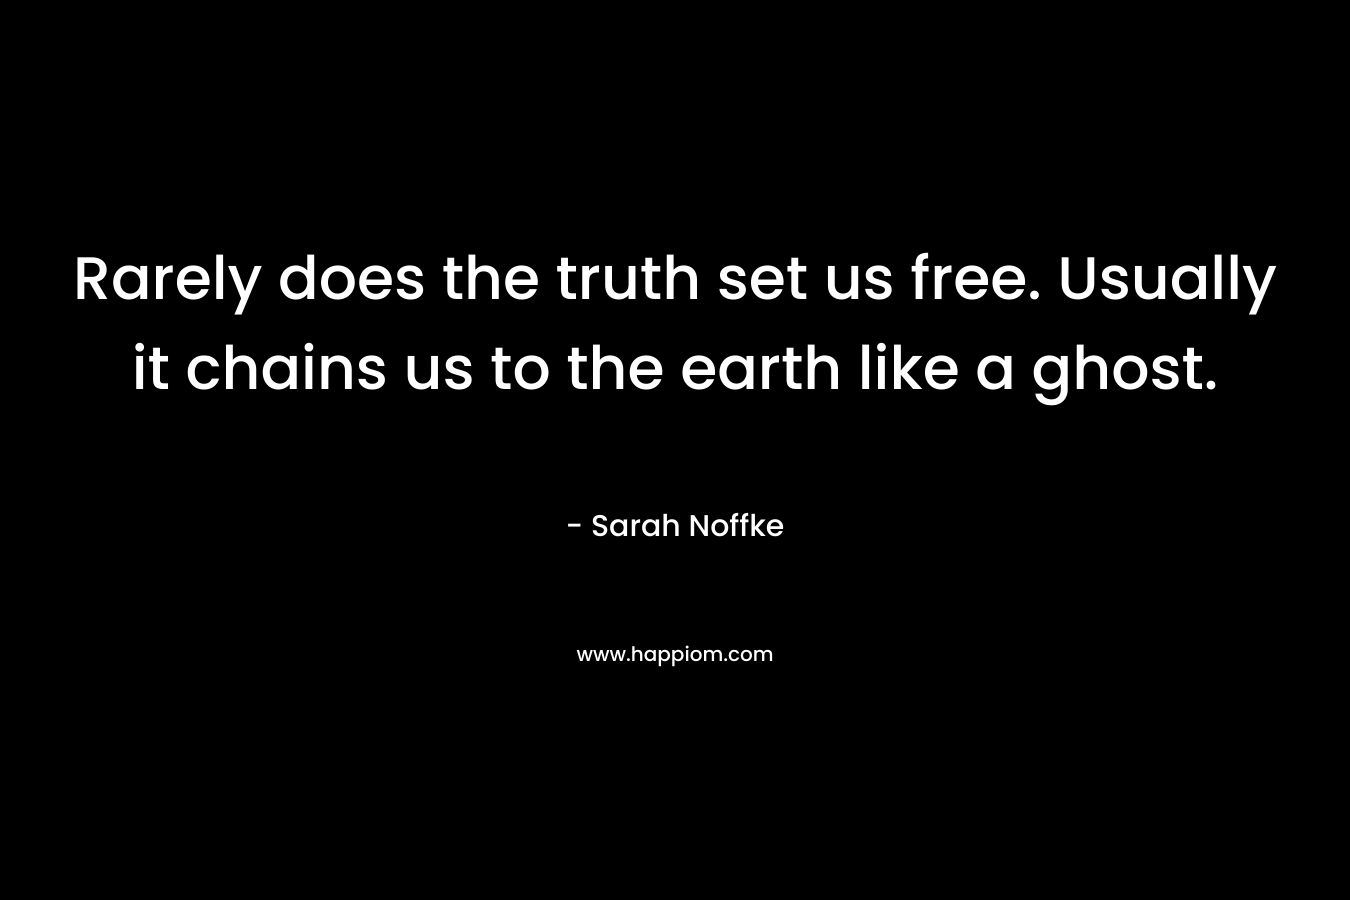 Rarely does the truth set us free. Usually it chains us to the earth like a ghost. – Sarah Noffke